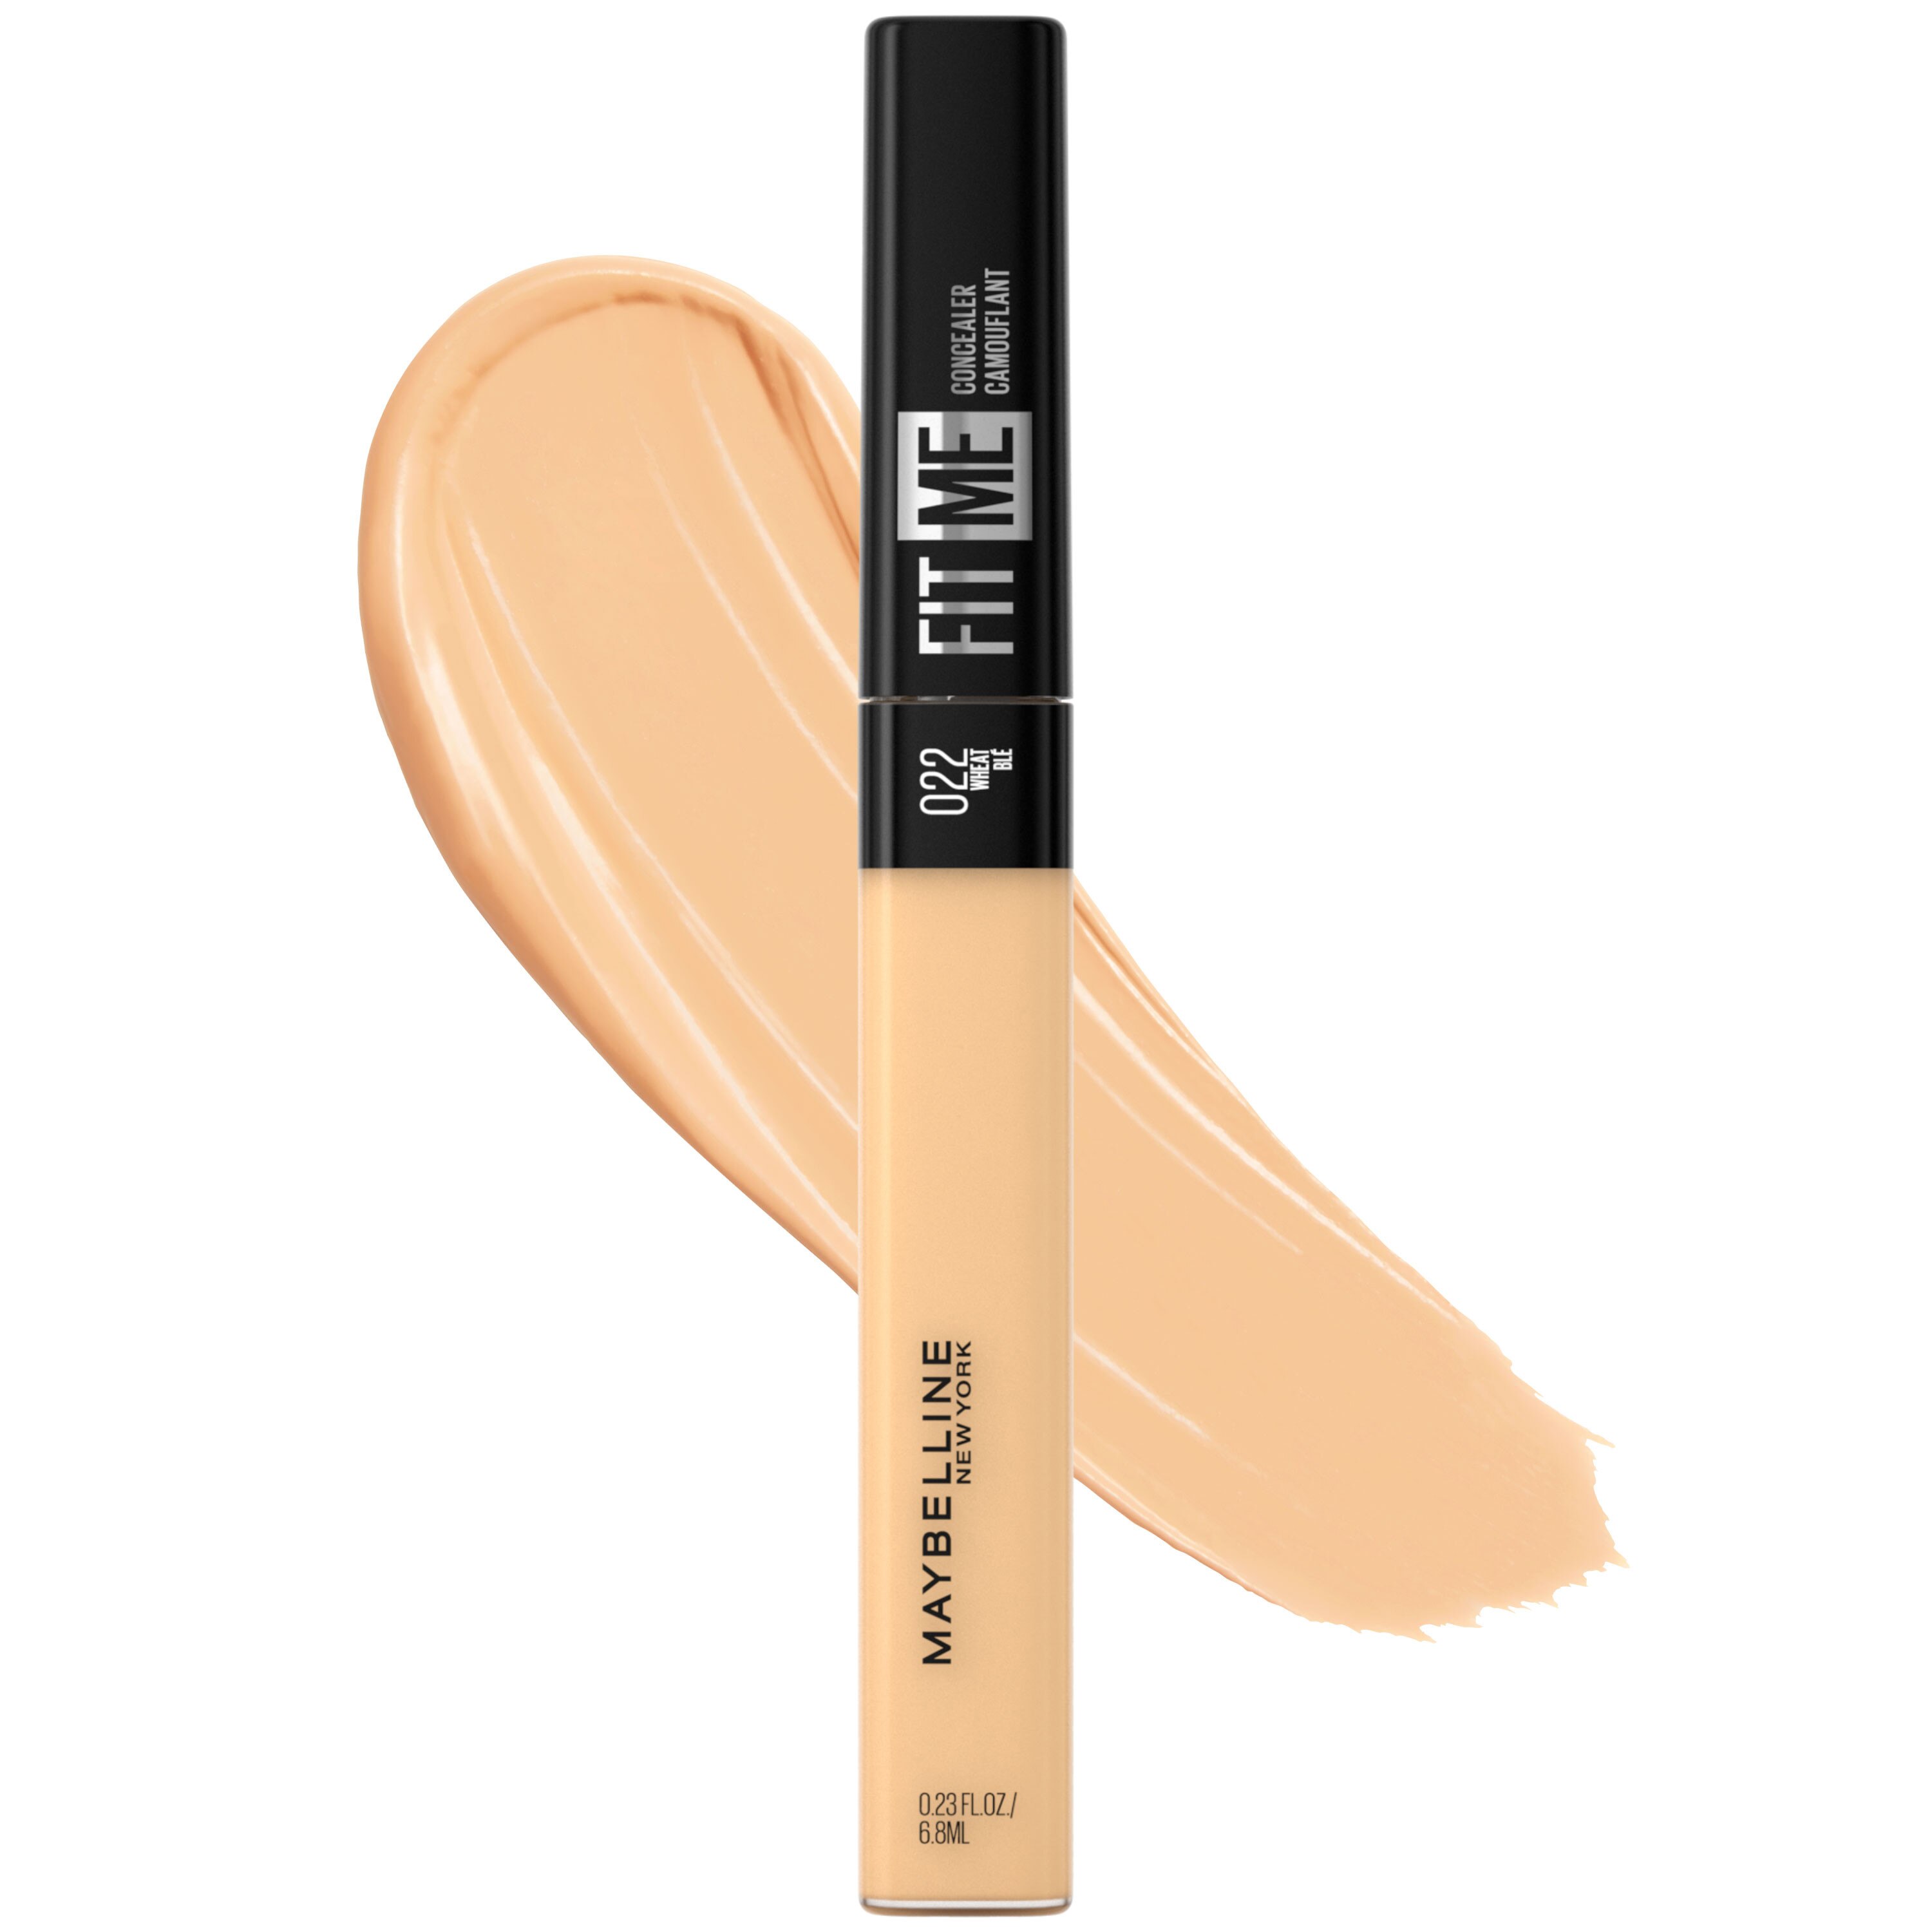 Maybelline New York Fit Me Liquid Concealer Makeup, Natural Coverage, Oil-Free, Wheat - 0.23 oz | CVS